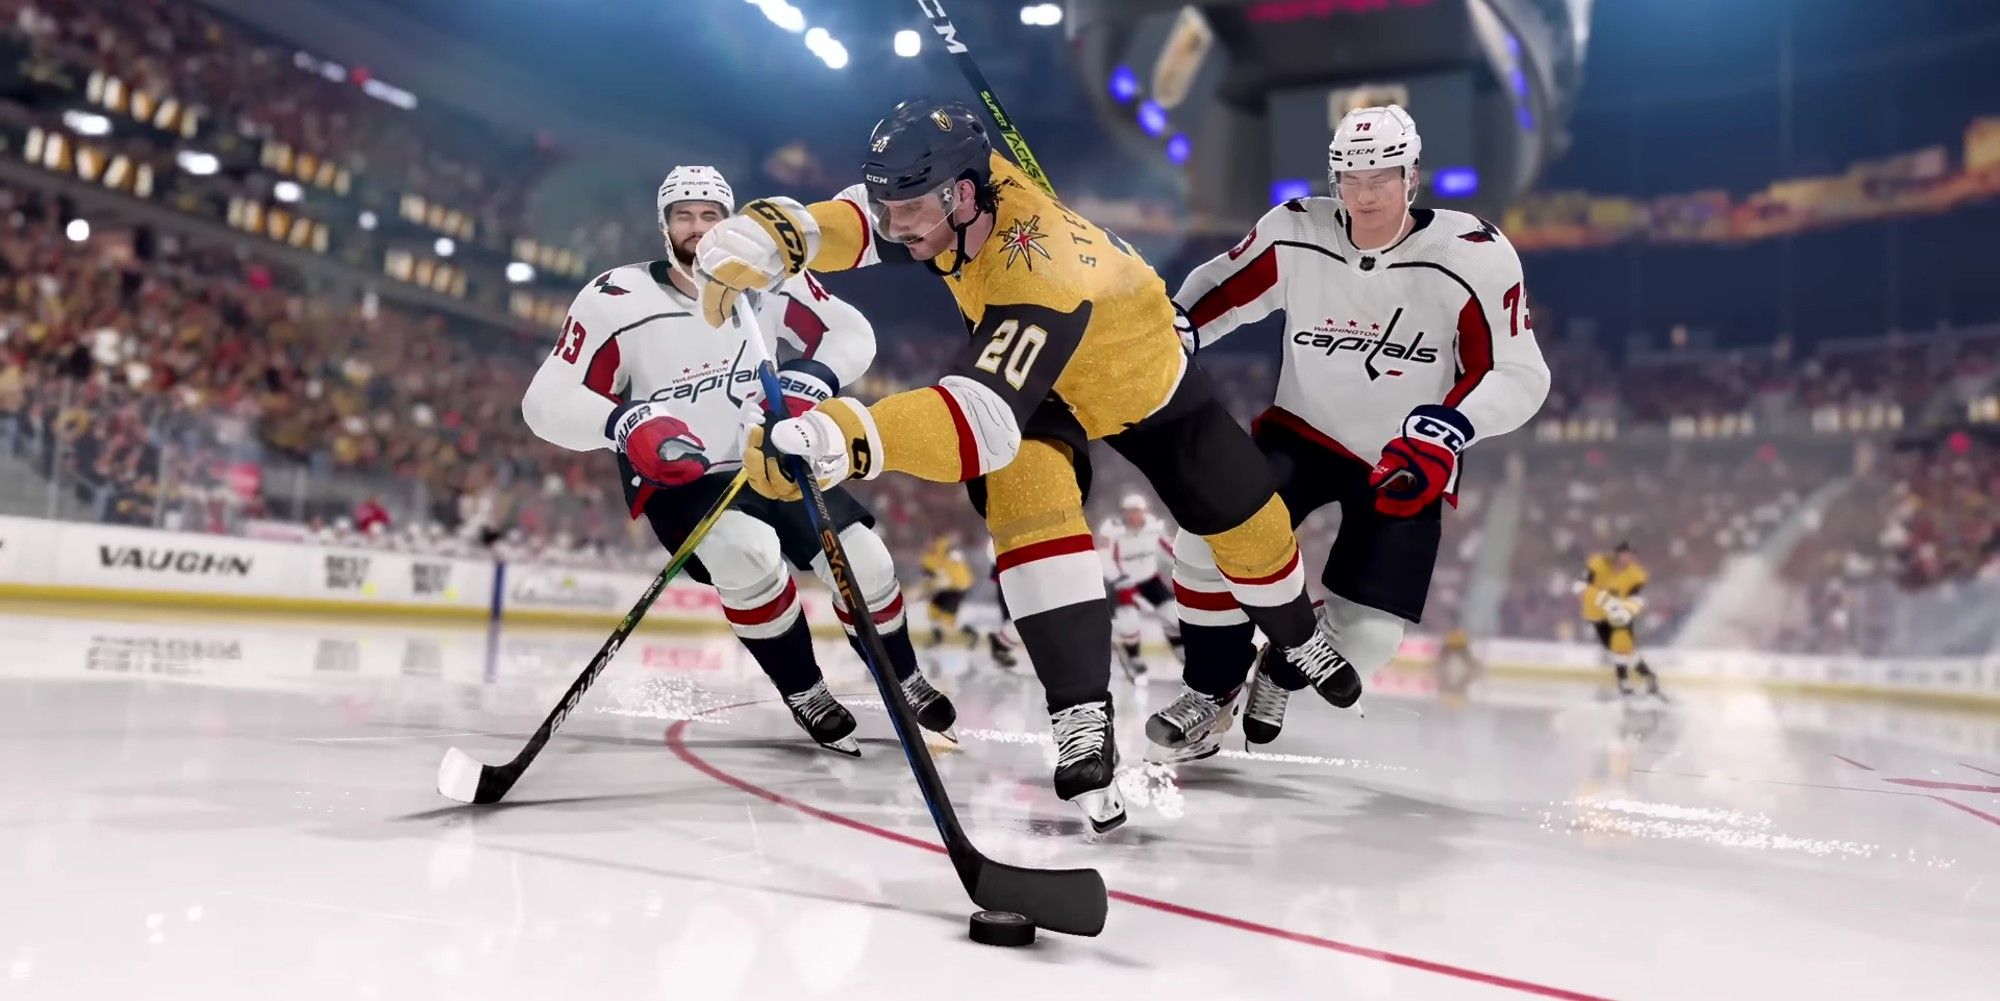 NHL 23 Review: It's a Terrible Game